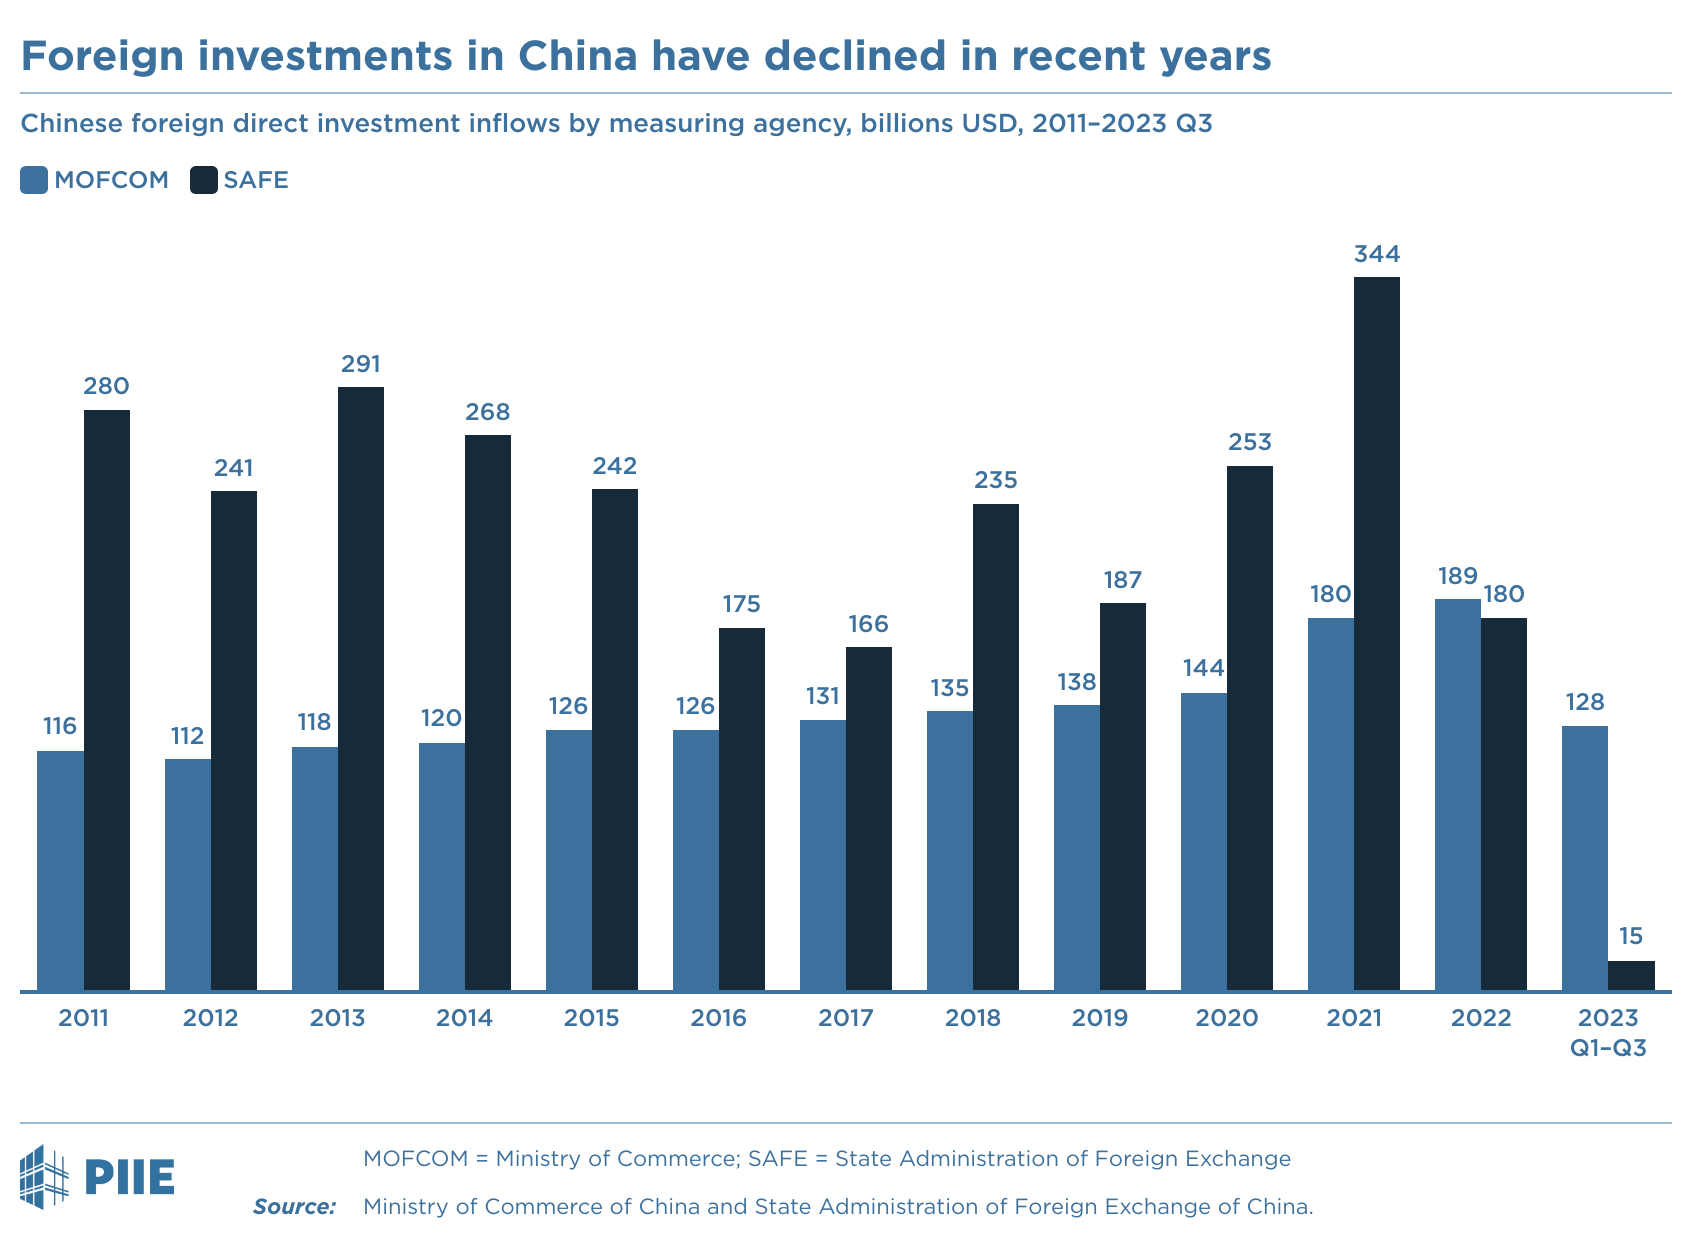 China is not attracting heavy Foreign Direct Investment (FDI) flows as it used to. Source: PIIE (2023). 